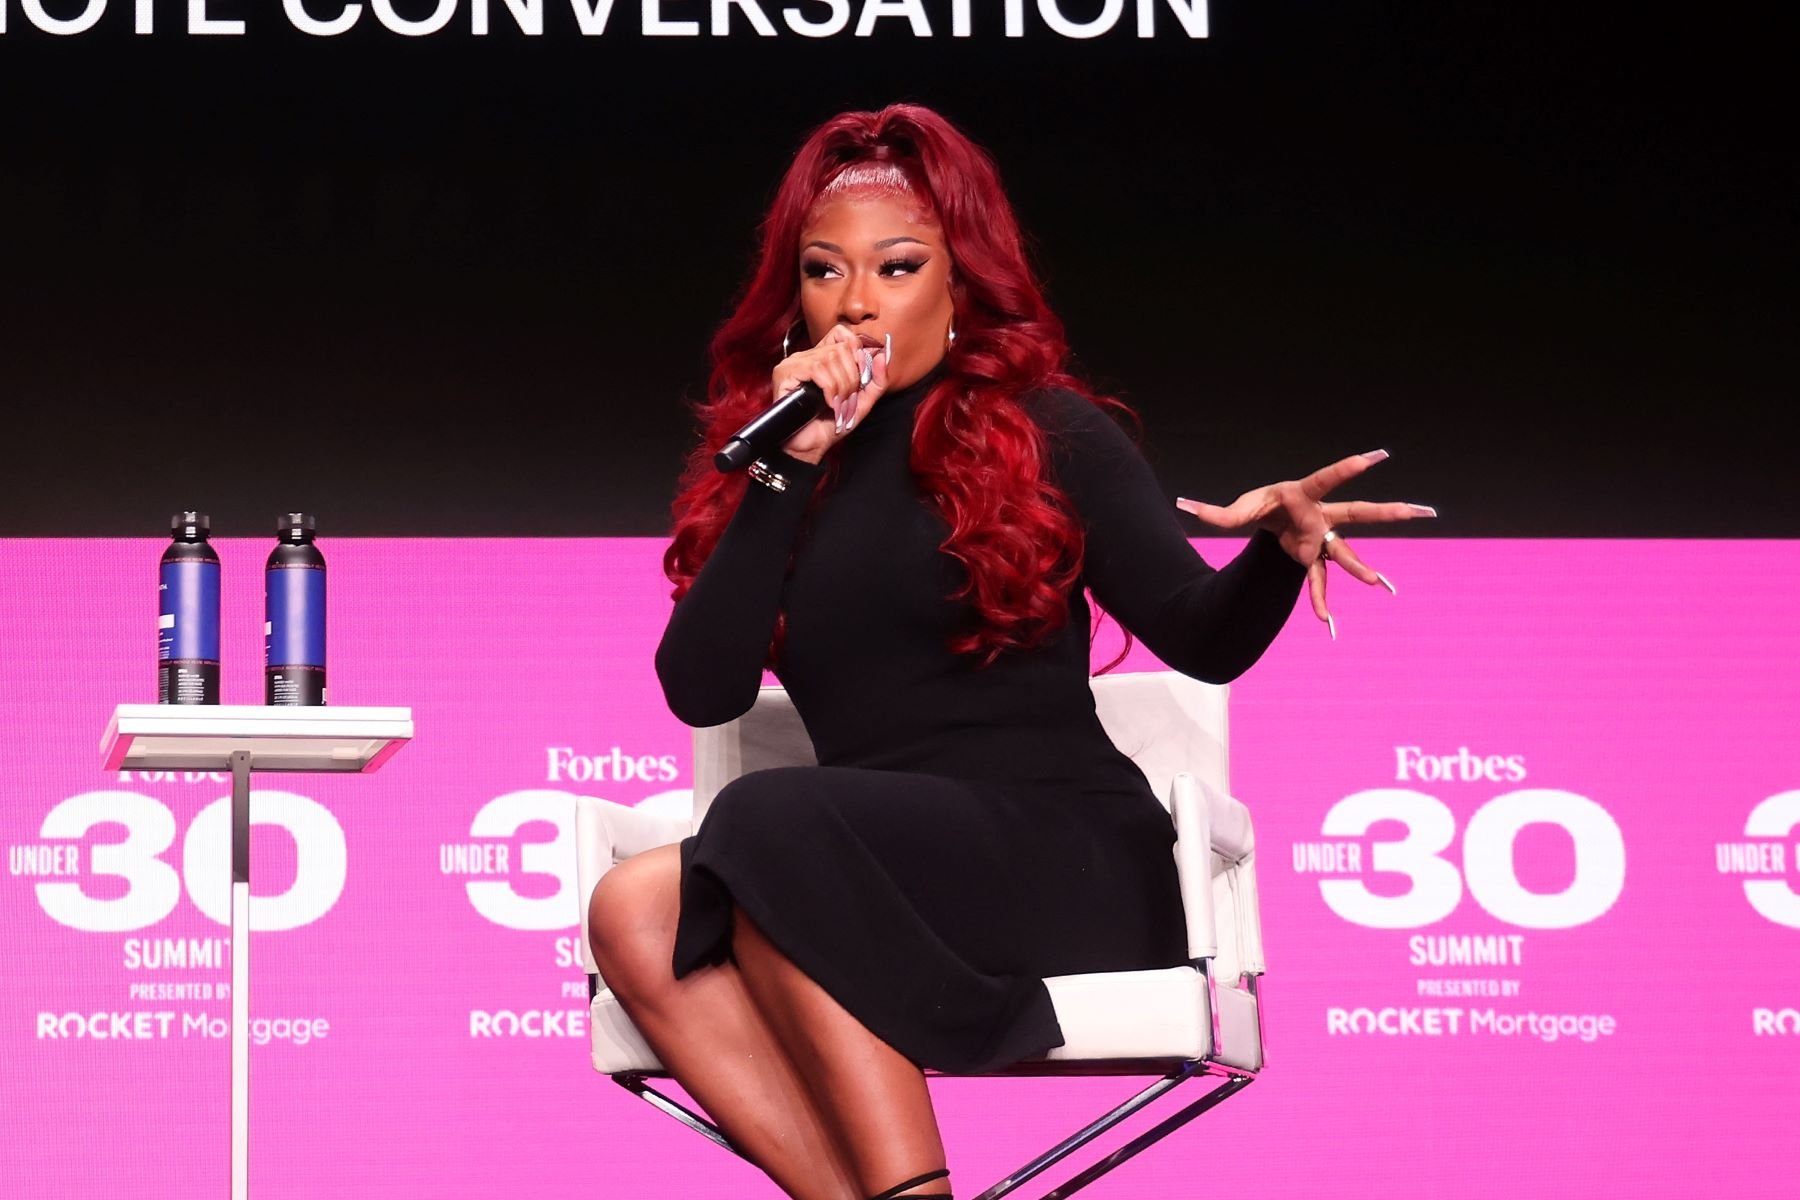 Megan Thee Stallion Forbes speaking at the 2022 Forbes 30 Under 30 Summit at the Detroit Opera House